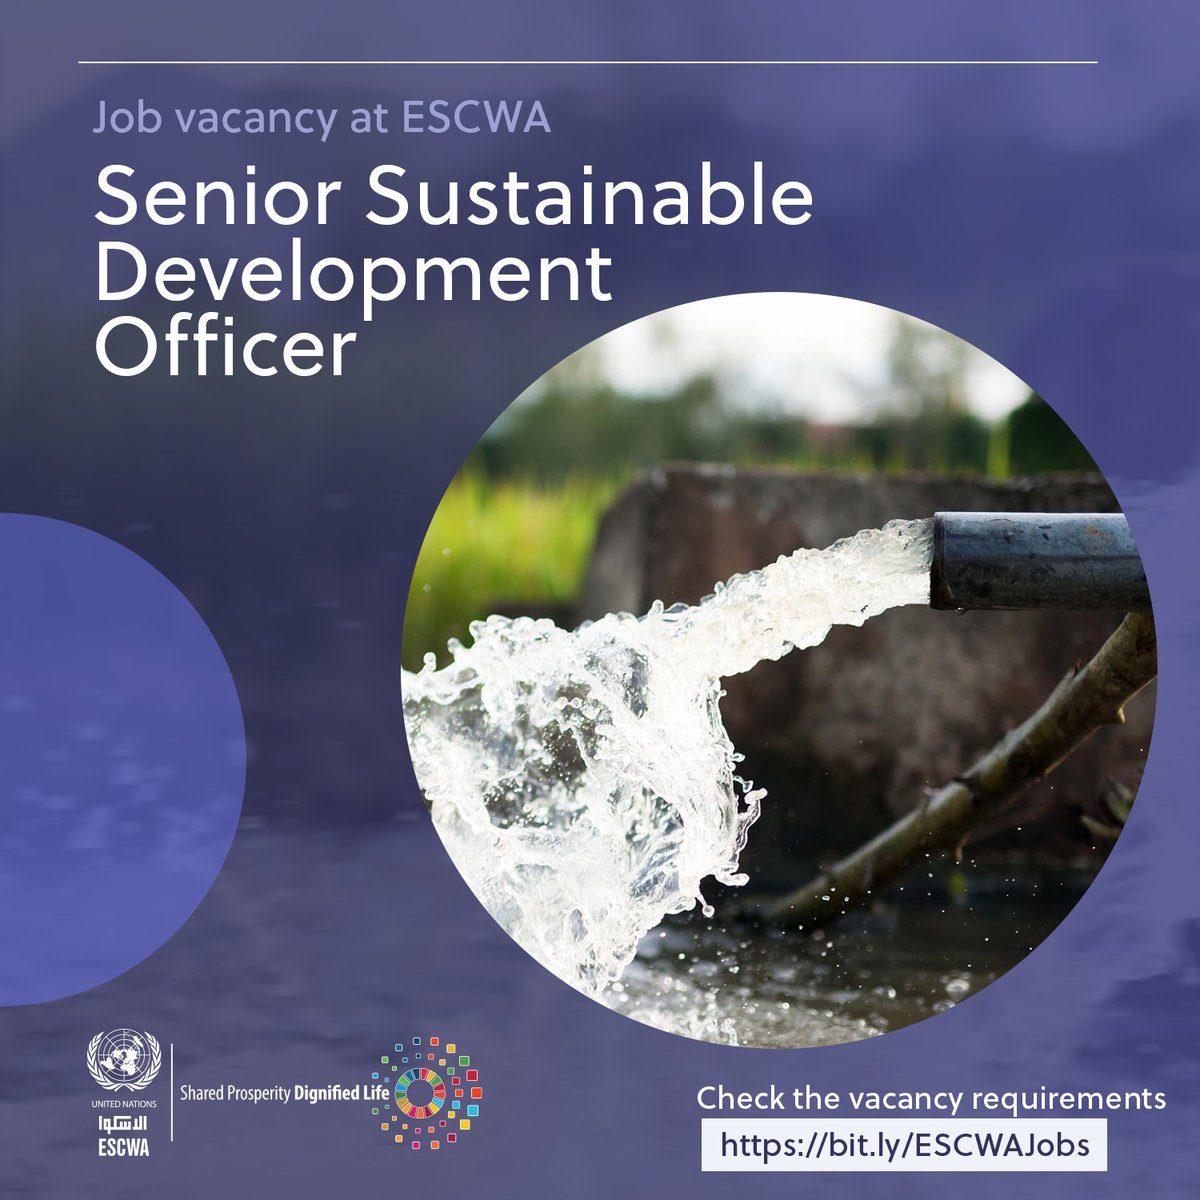 #ESCWA is hiring a Senior Sustainable Development Officer (Water) to work within the Climate Change and Natural Resource Sustainability Cluster. If you have 10+ years of experience in water-related issues, apply 👉 bit.ly/ESCWAJobs by 18 April.